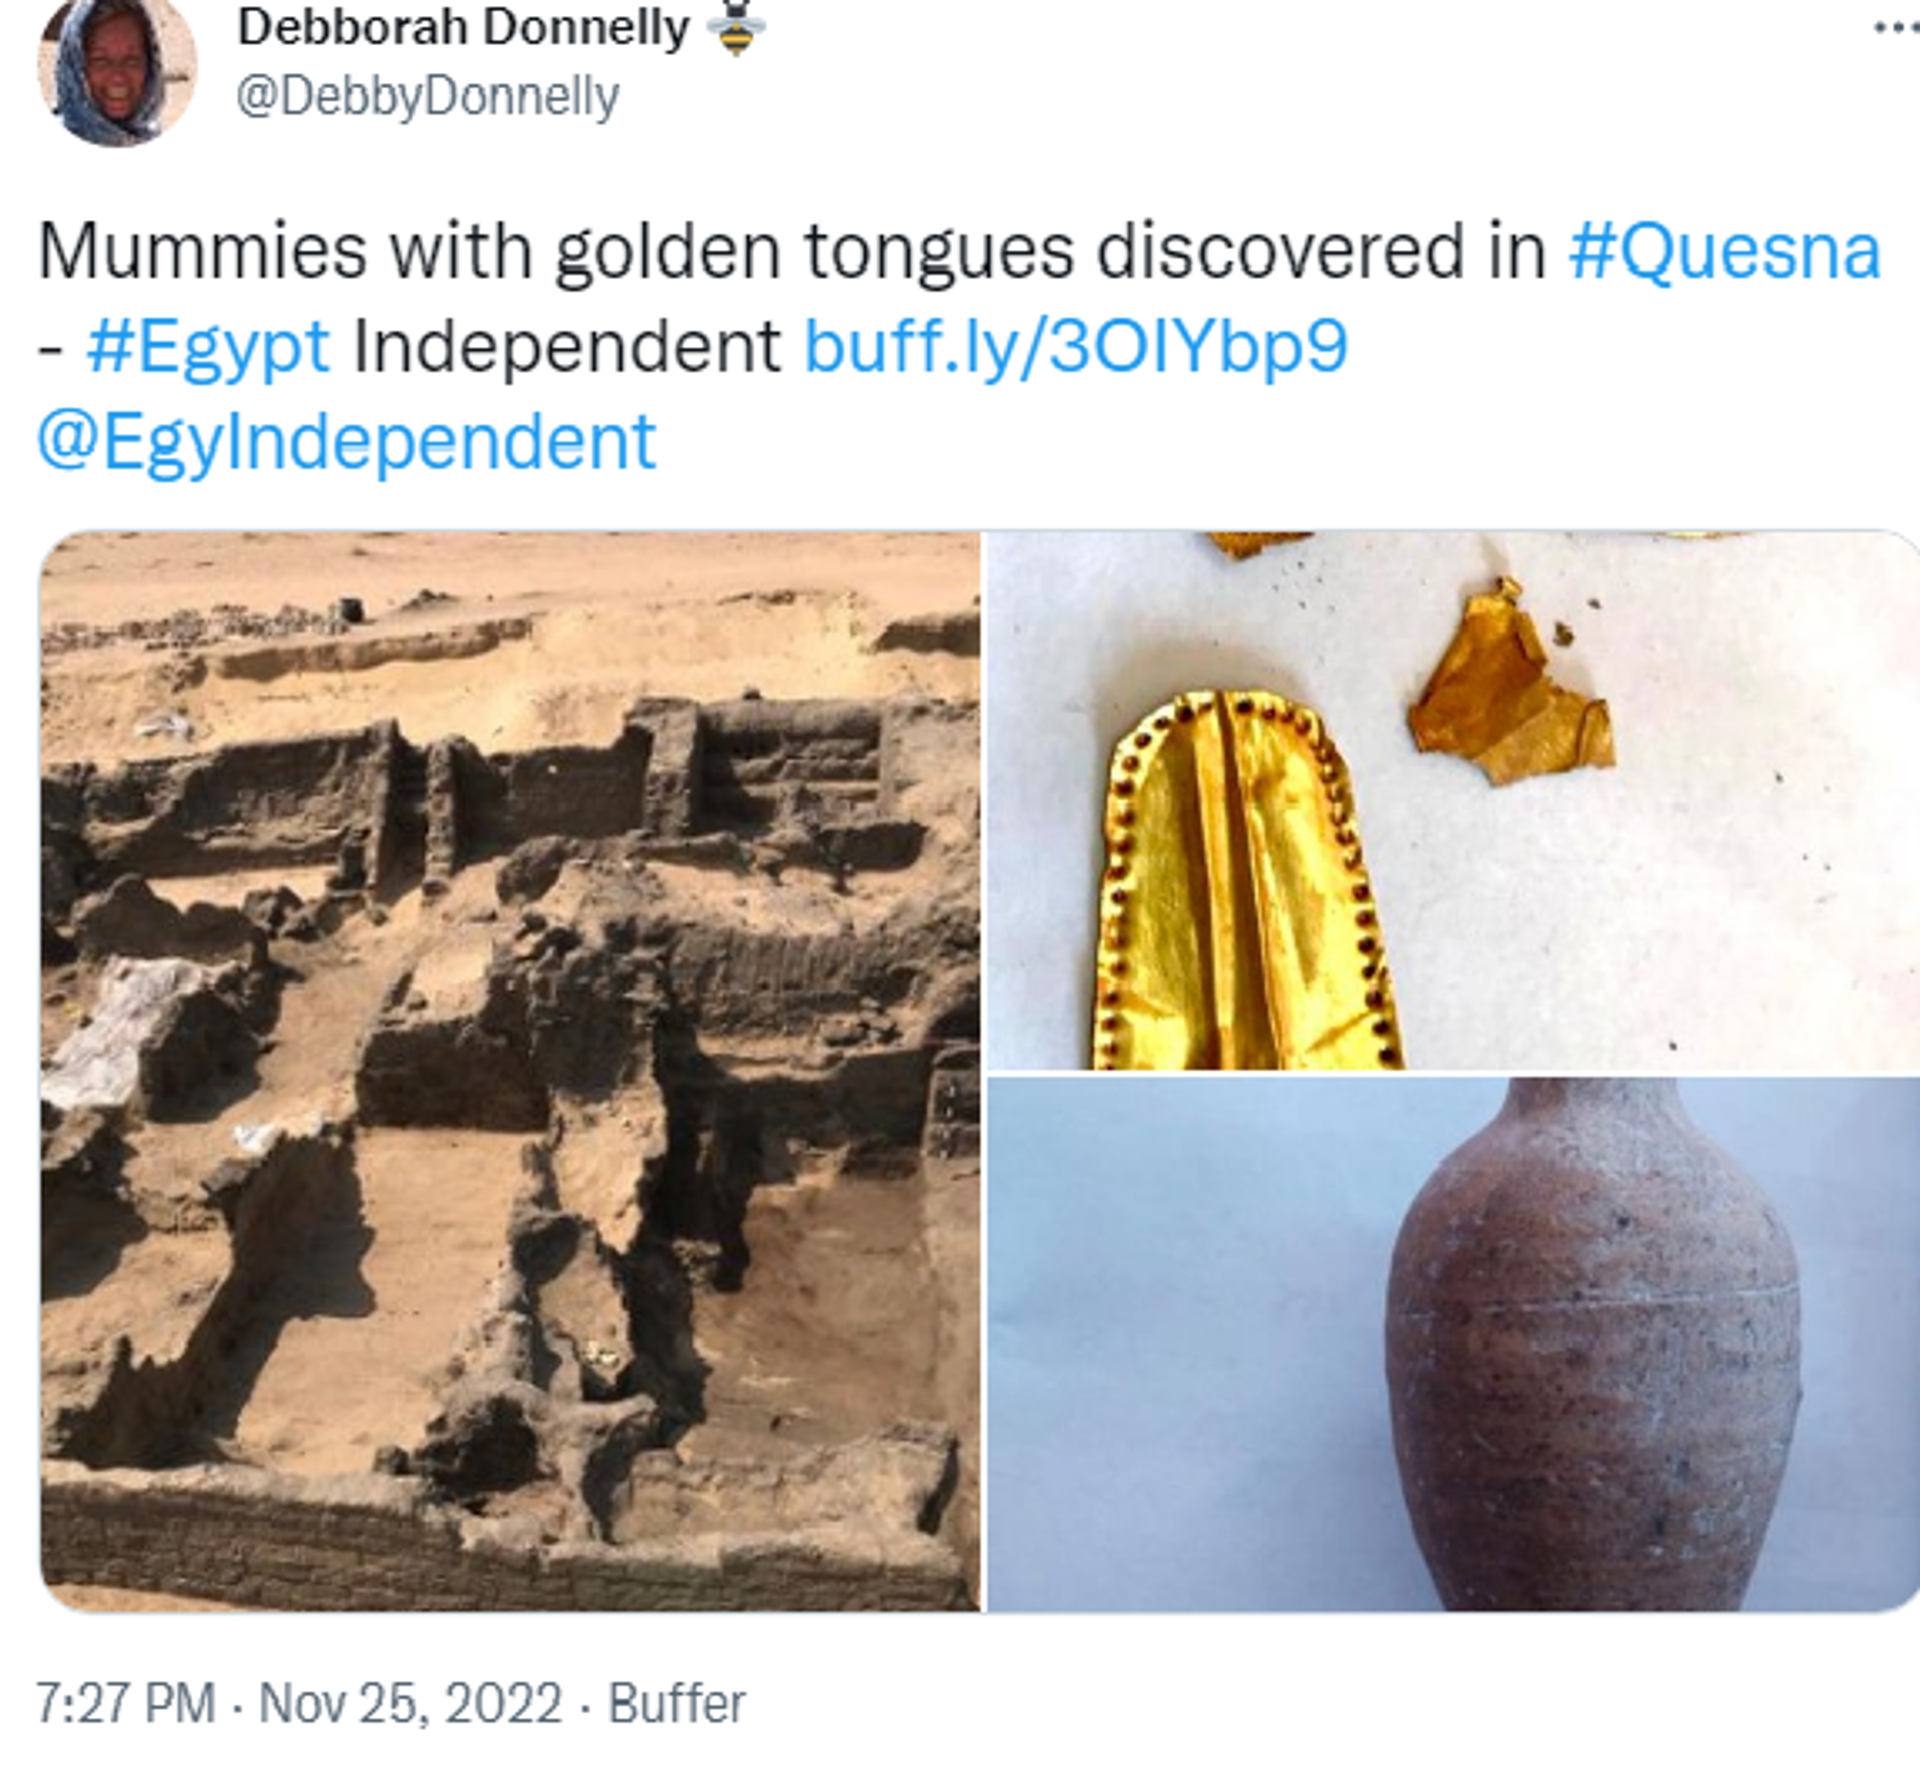 Twitter screenshot showing mummies with golden tongues discovered in Quesna, Egypt - Sputnik International, 1920, 26.11.2022